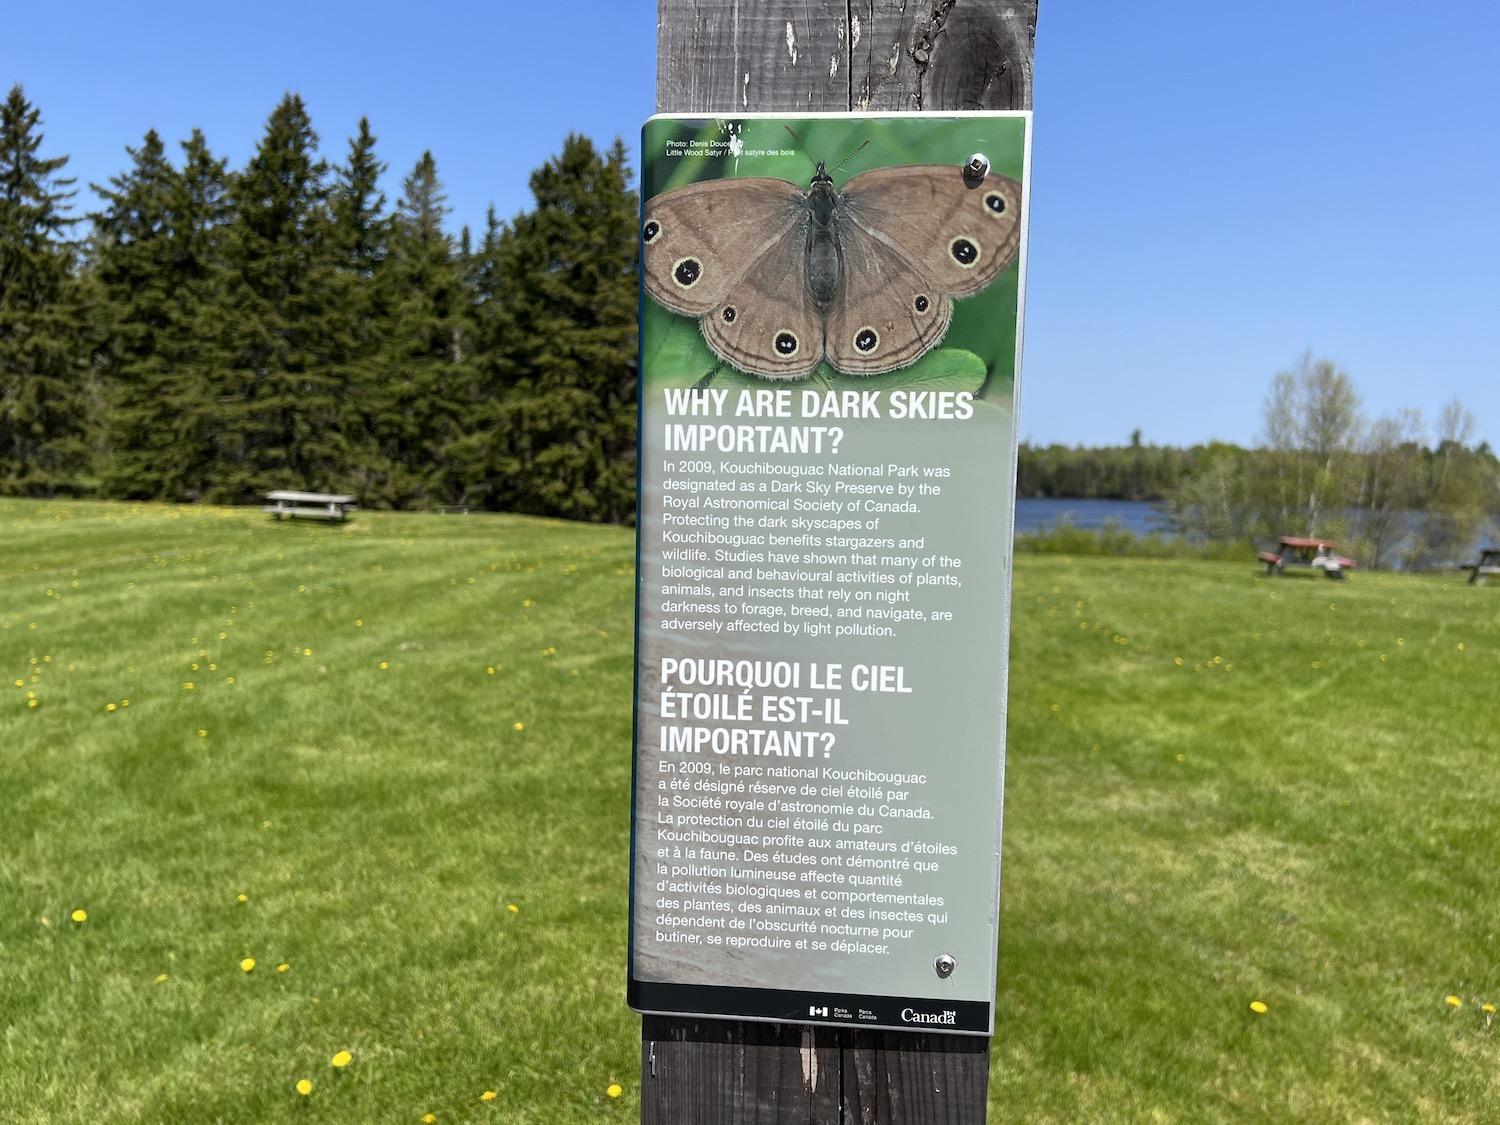 At a picnic spot called La Source in Kouchibouguac, interpretive signs promote the park's dark skies.